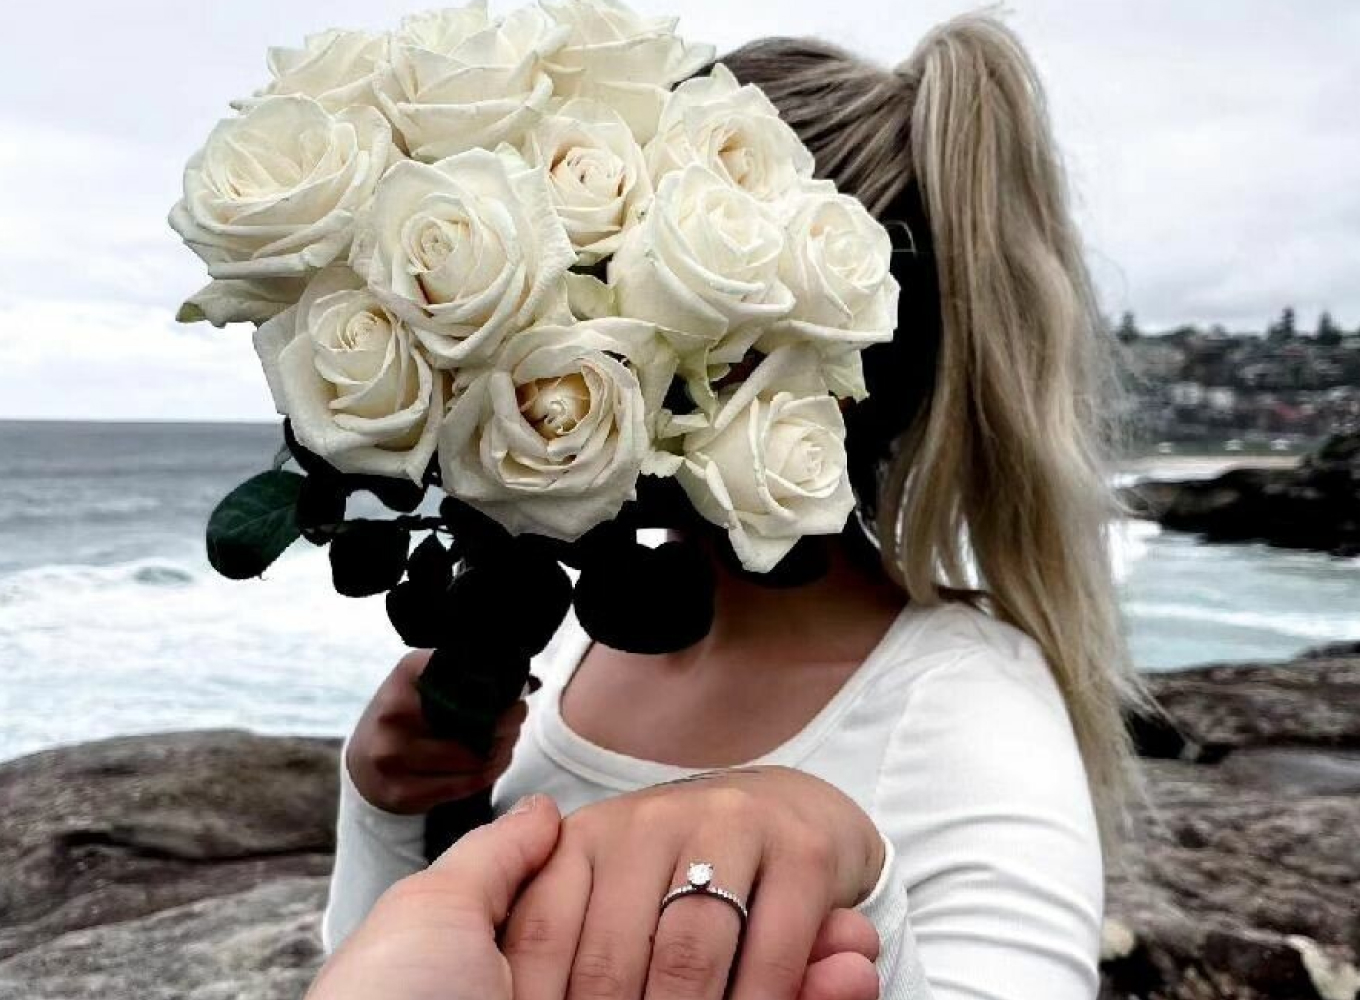 Woman hiding behind roses holding engagement ring after being proposed to